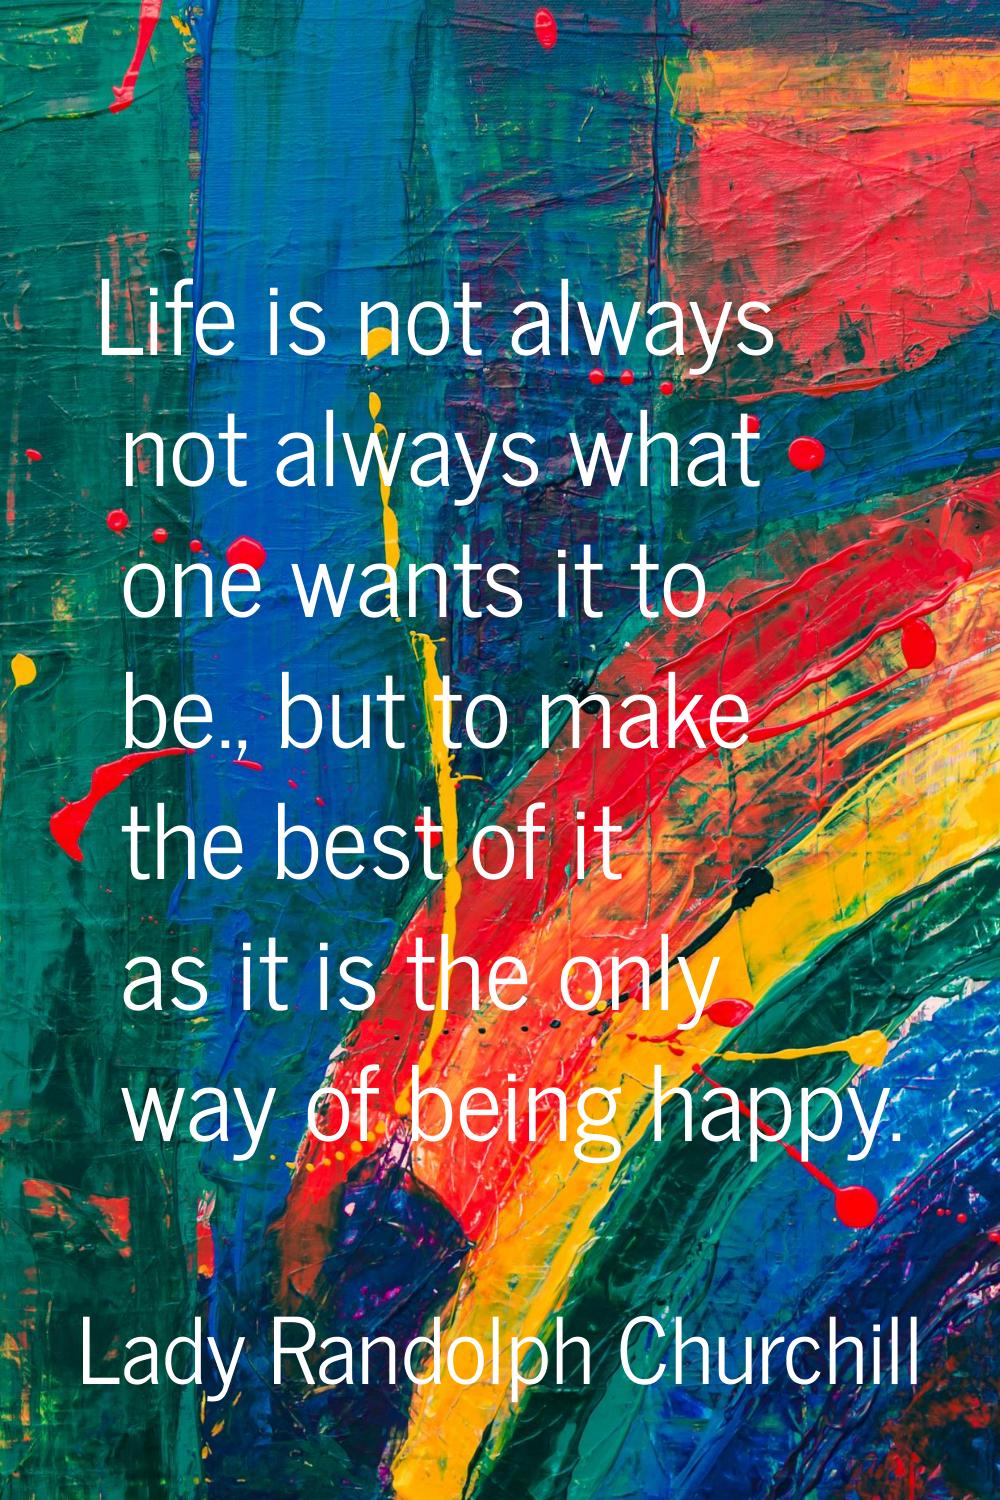 Life is not always not always what one wants it to be., but to make the best of it as it is the onl